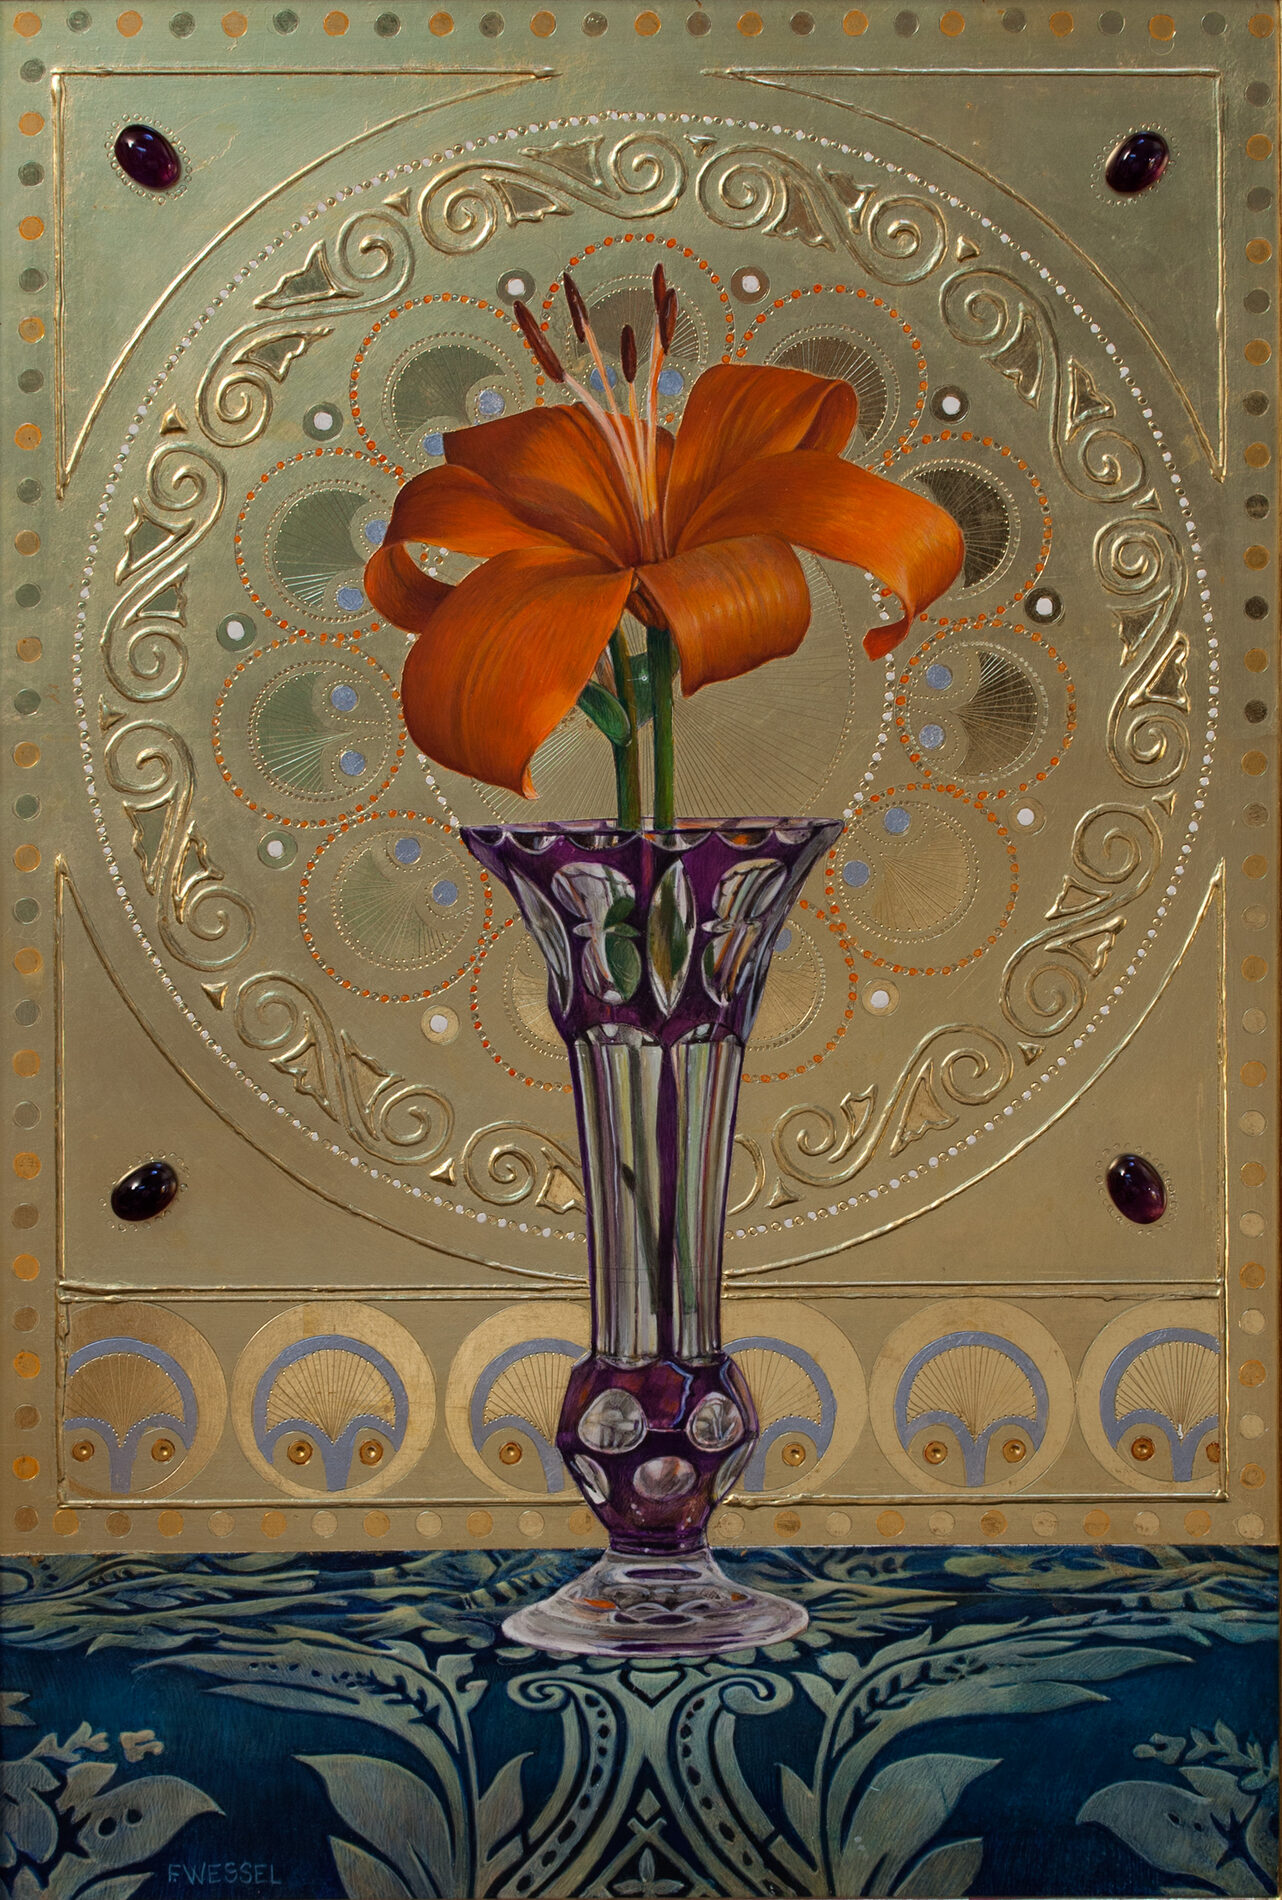 In front of a gold background with circular designs is a purple and silver vase on a blue, patterned table cloth holding a large, red flower.